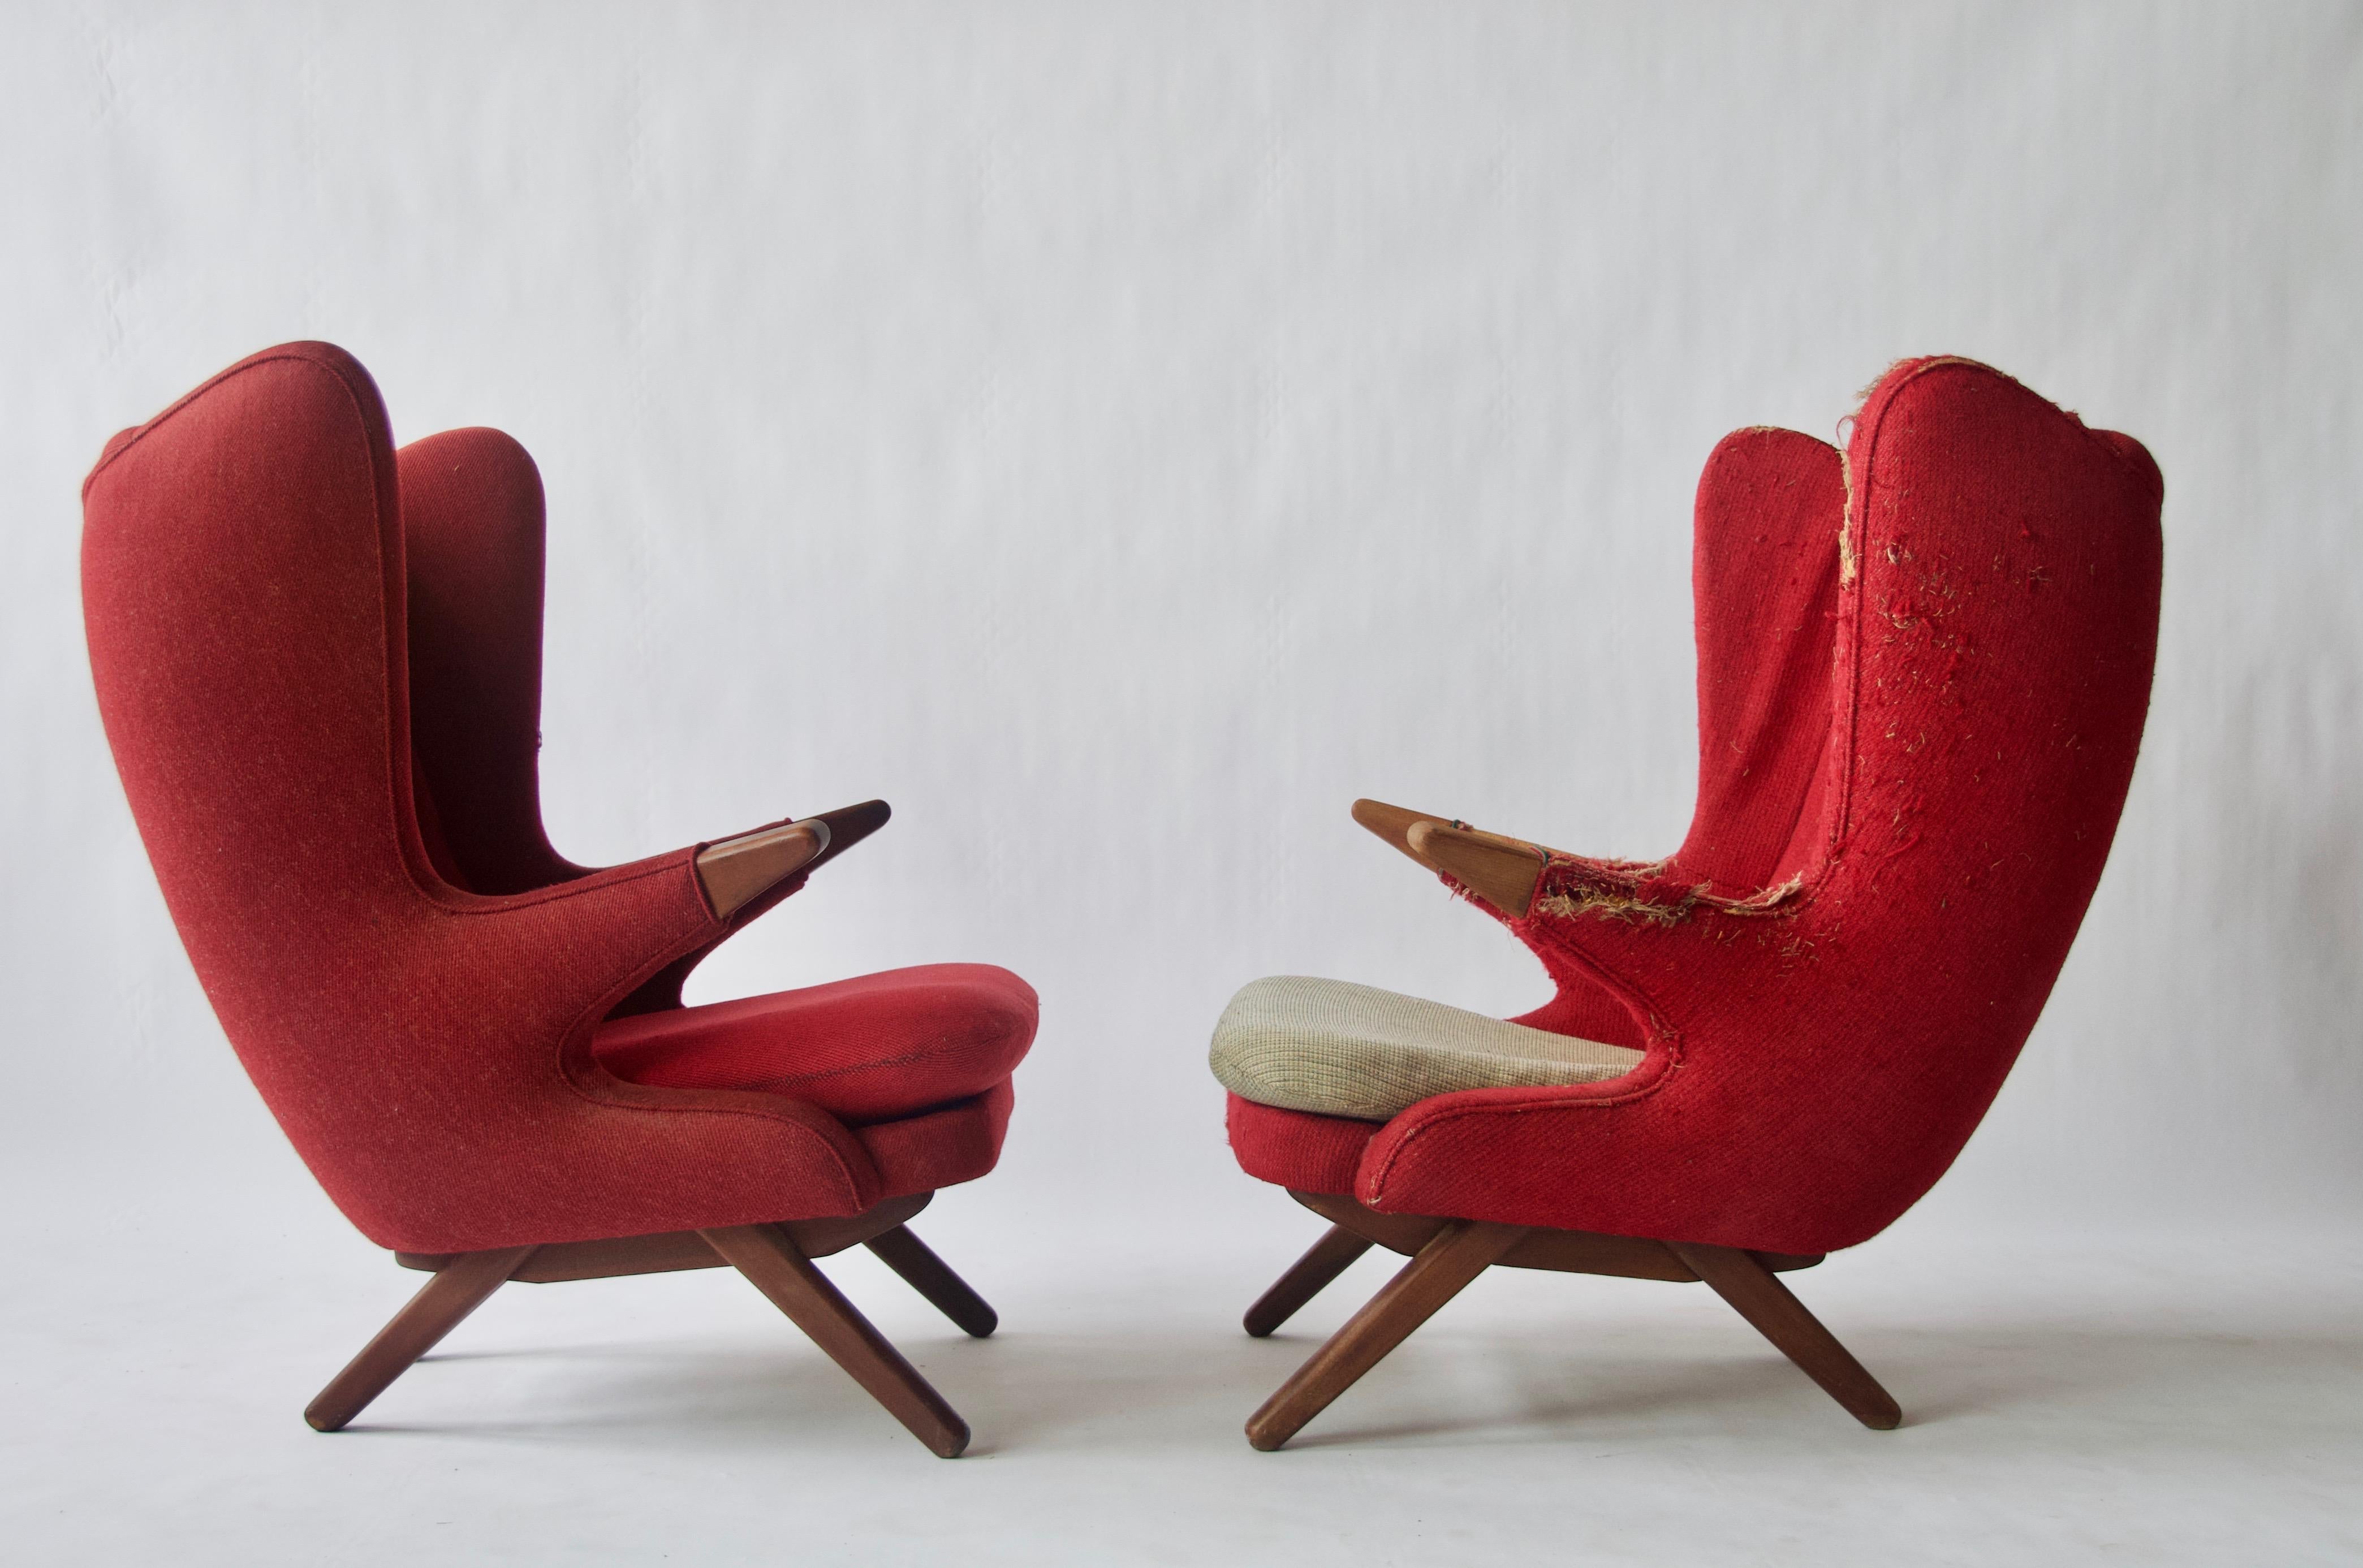 Pair of Sven Skipper lounge chairs.